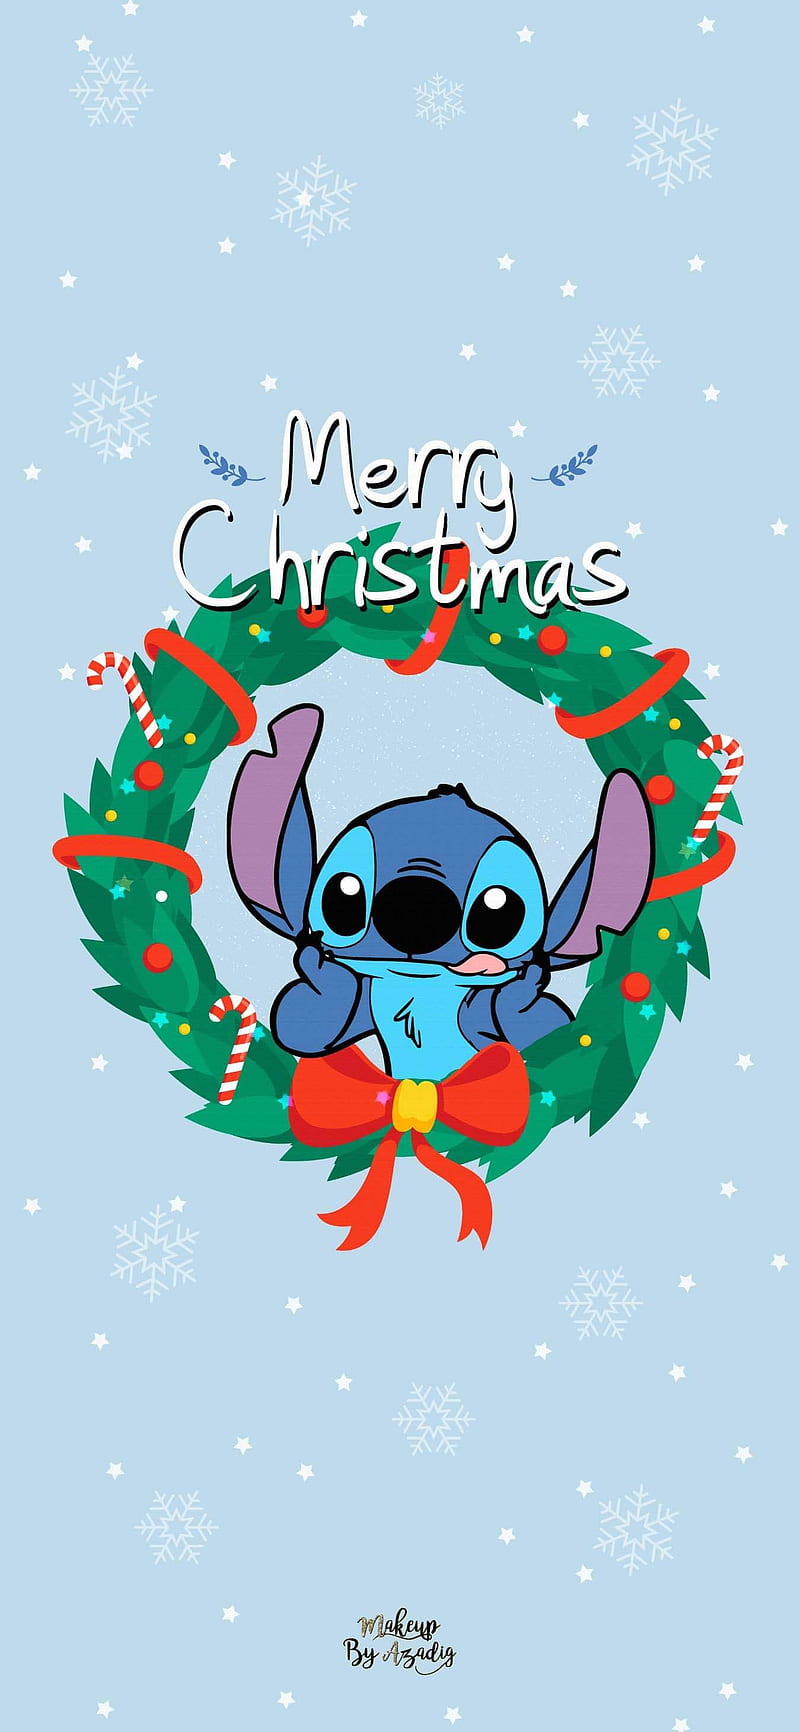 Follow stitchiglovers if you love stitch Use stitchiglovers to be  featured Tag your Stitch friends Follow us for more  Instagram